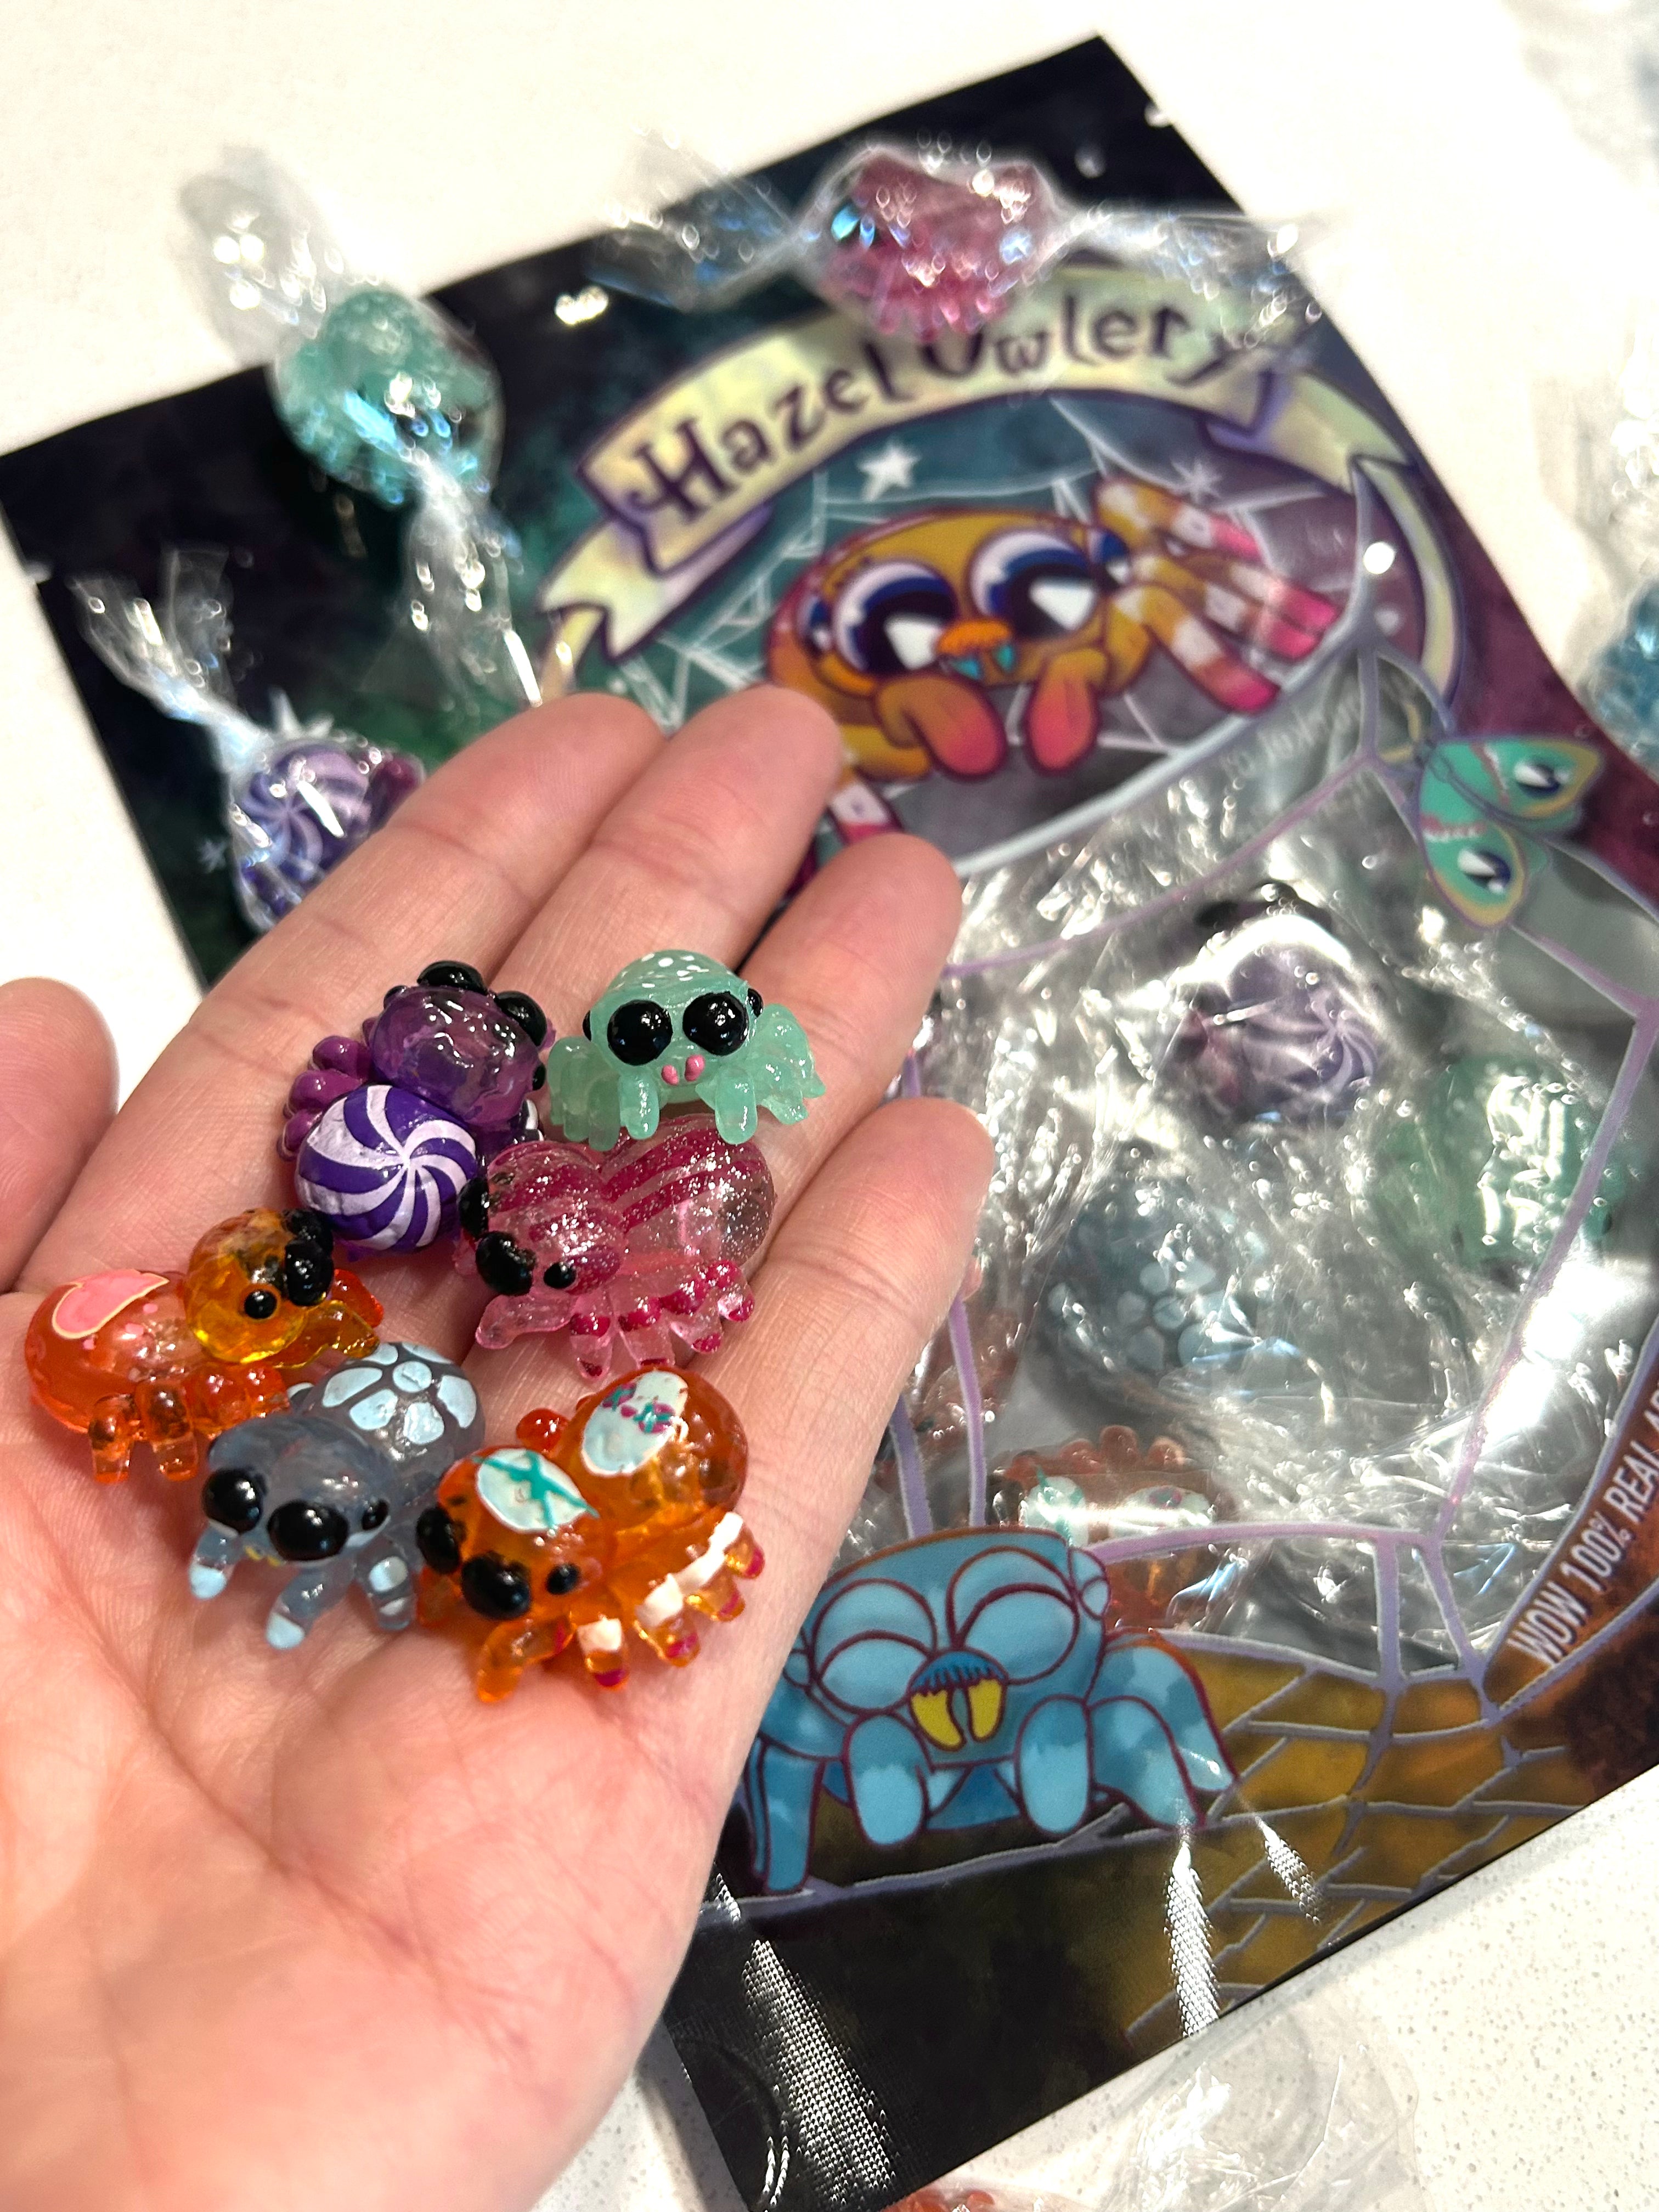 A hand holding small plastic spiders, a toy, and a candy from Spidey Sweets by Hazel Owlery.